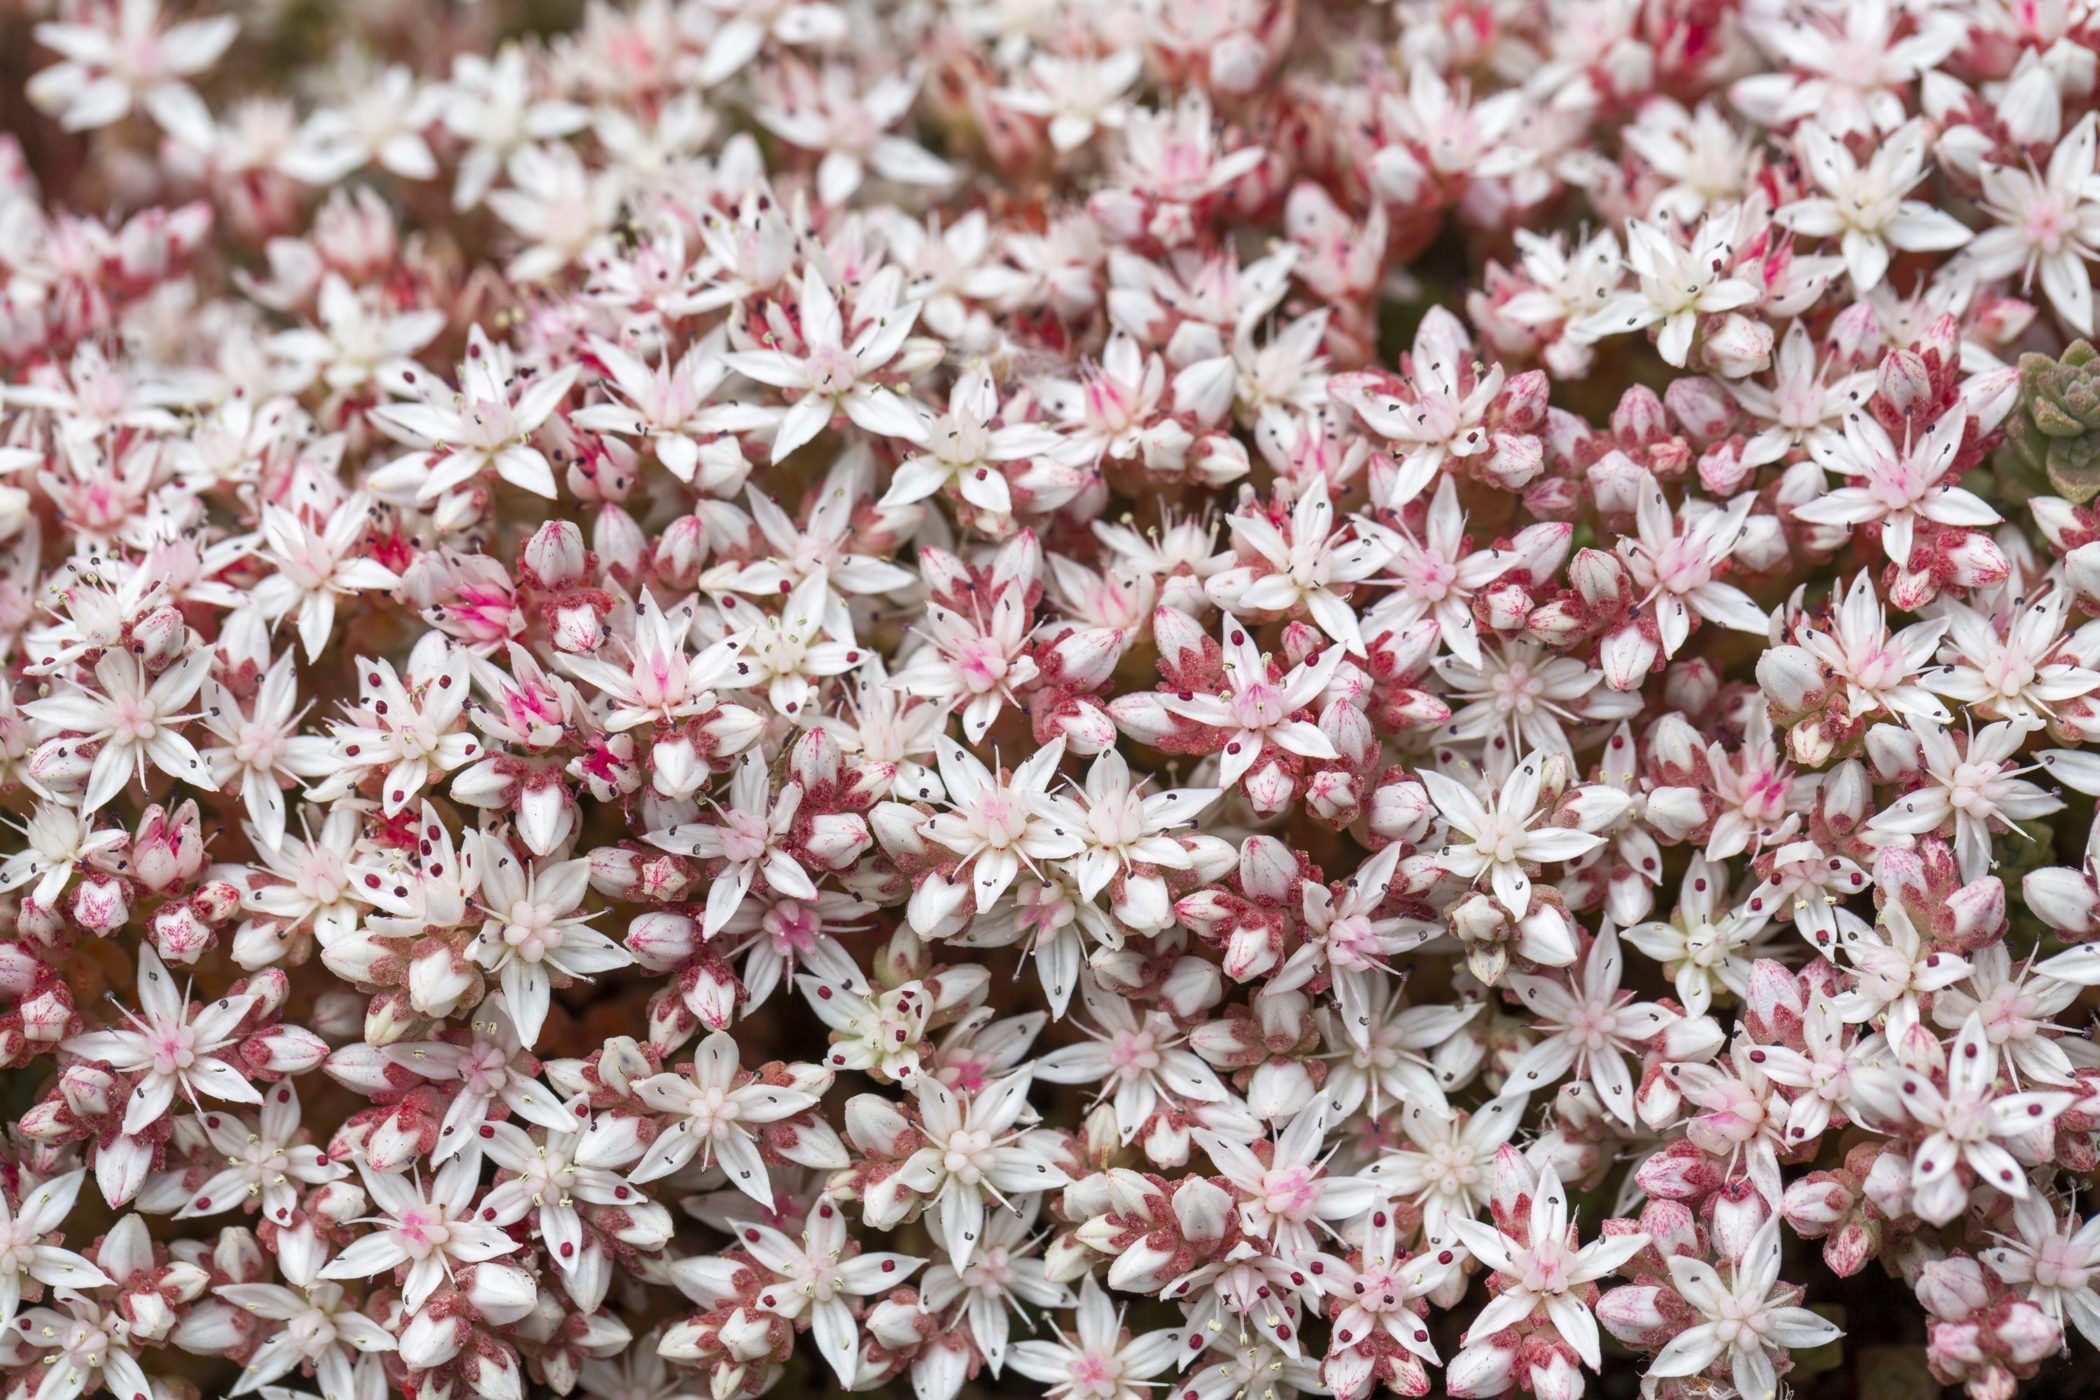 English stonecrop is a succulent plant which grows well on bare ground. Credit: David Chapman